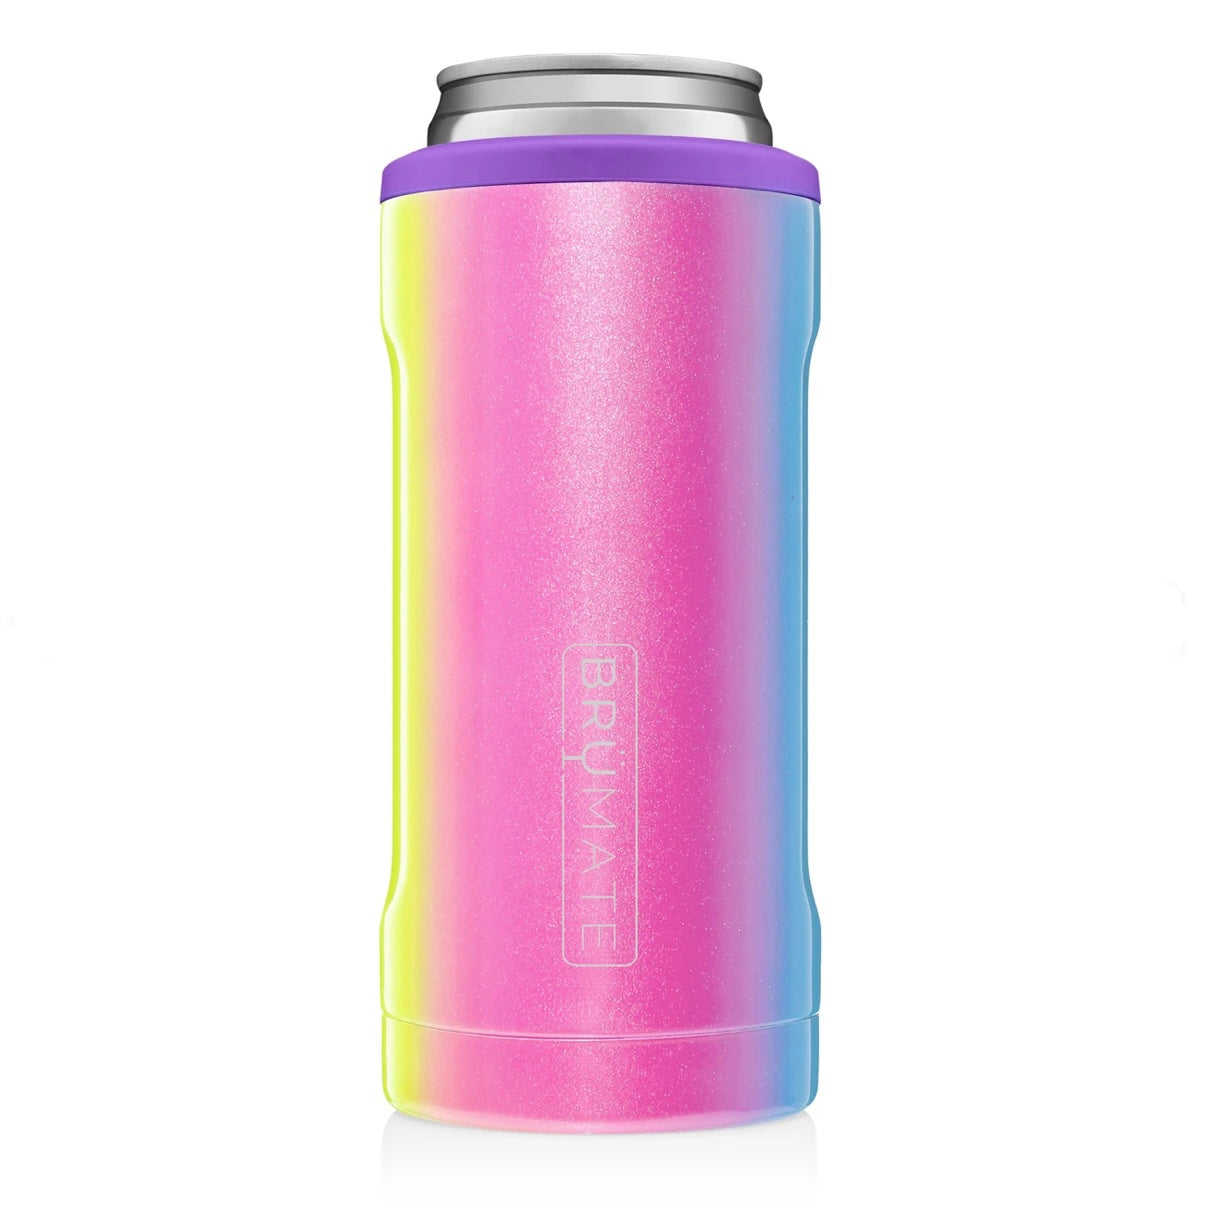 slim cans leak-proof drinkware hot to cold insulated drinkware tumbler like yeti brumate spillproof pastel glitter